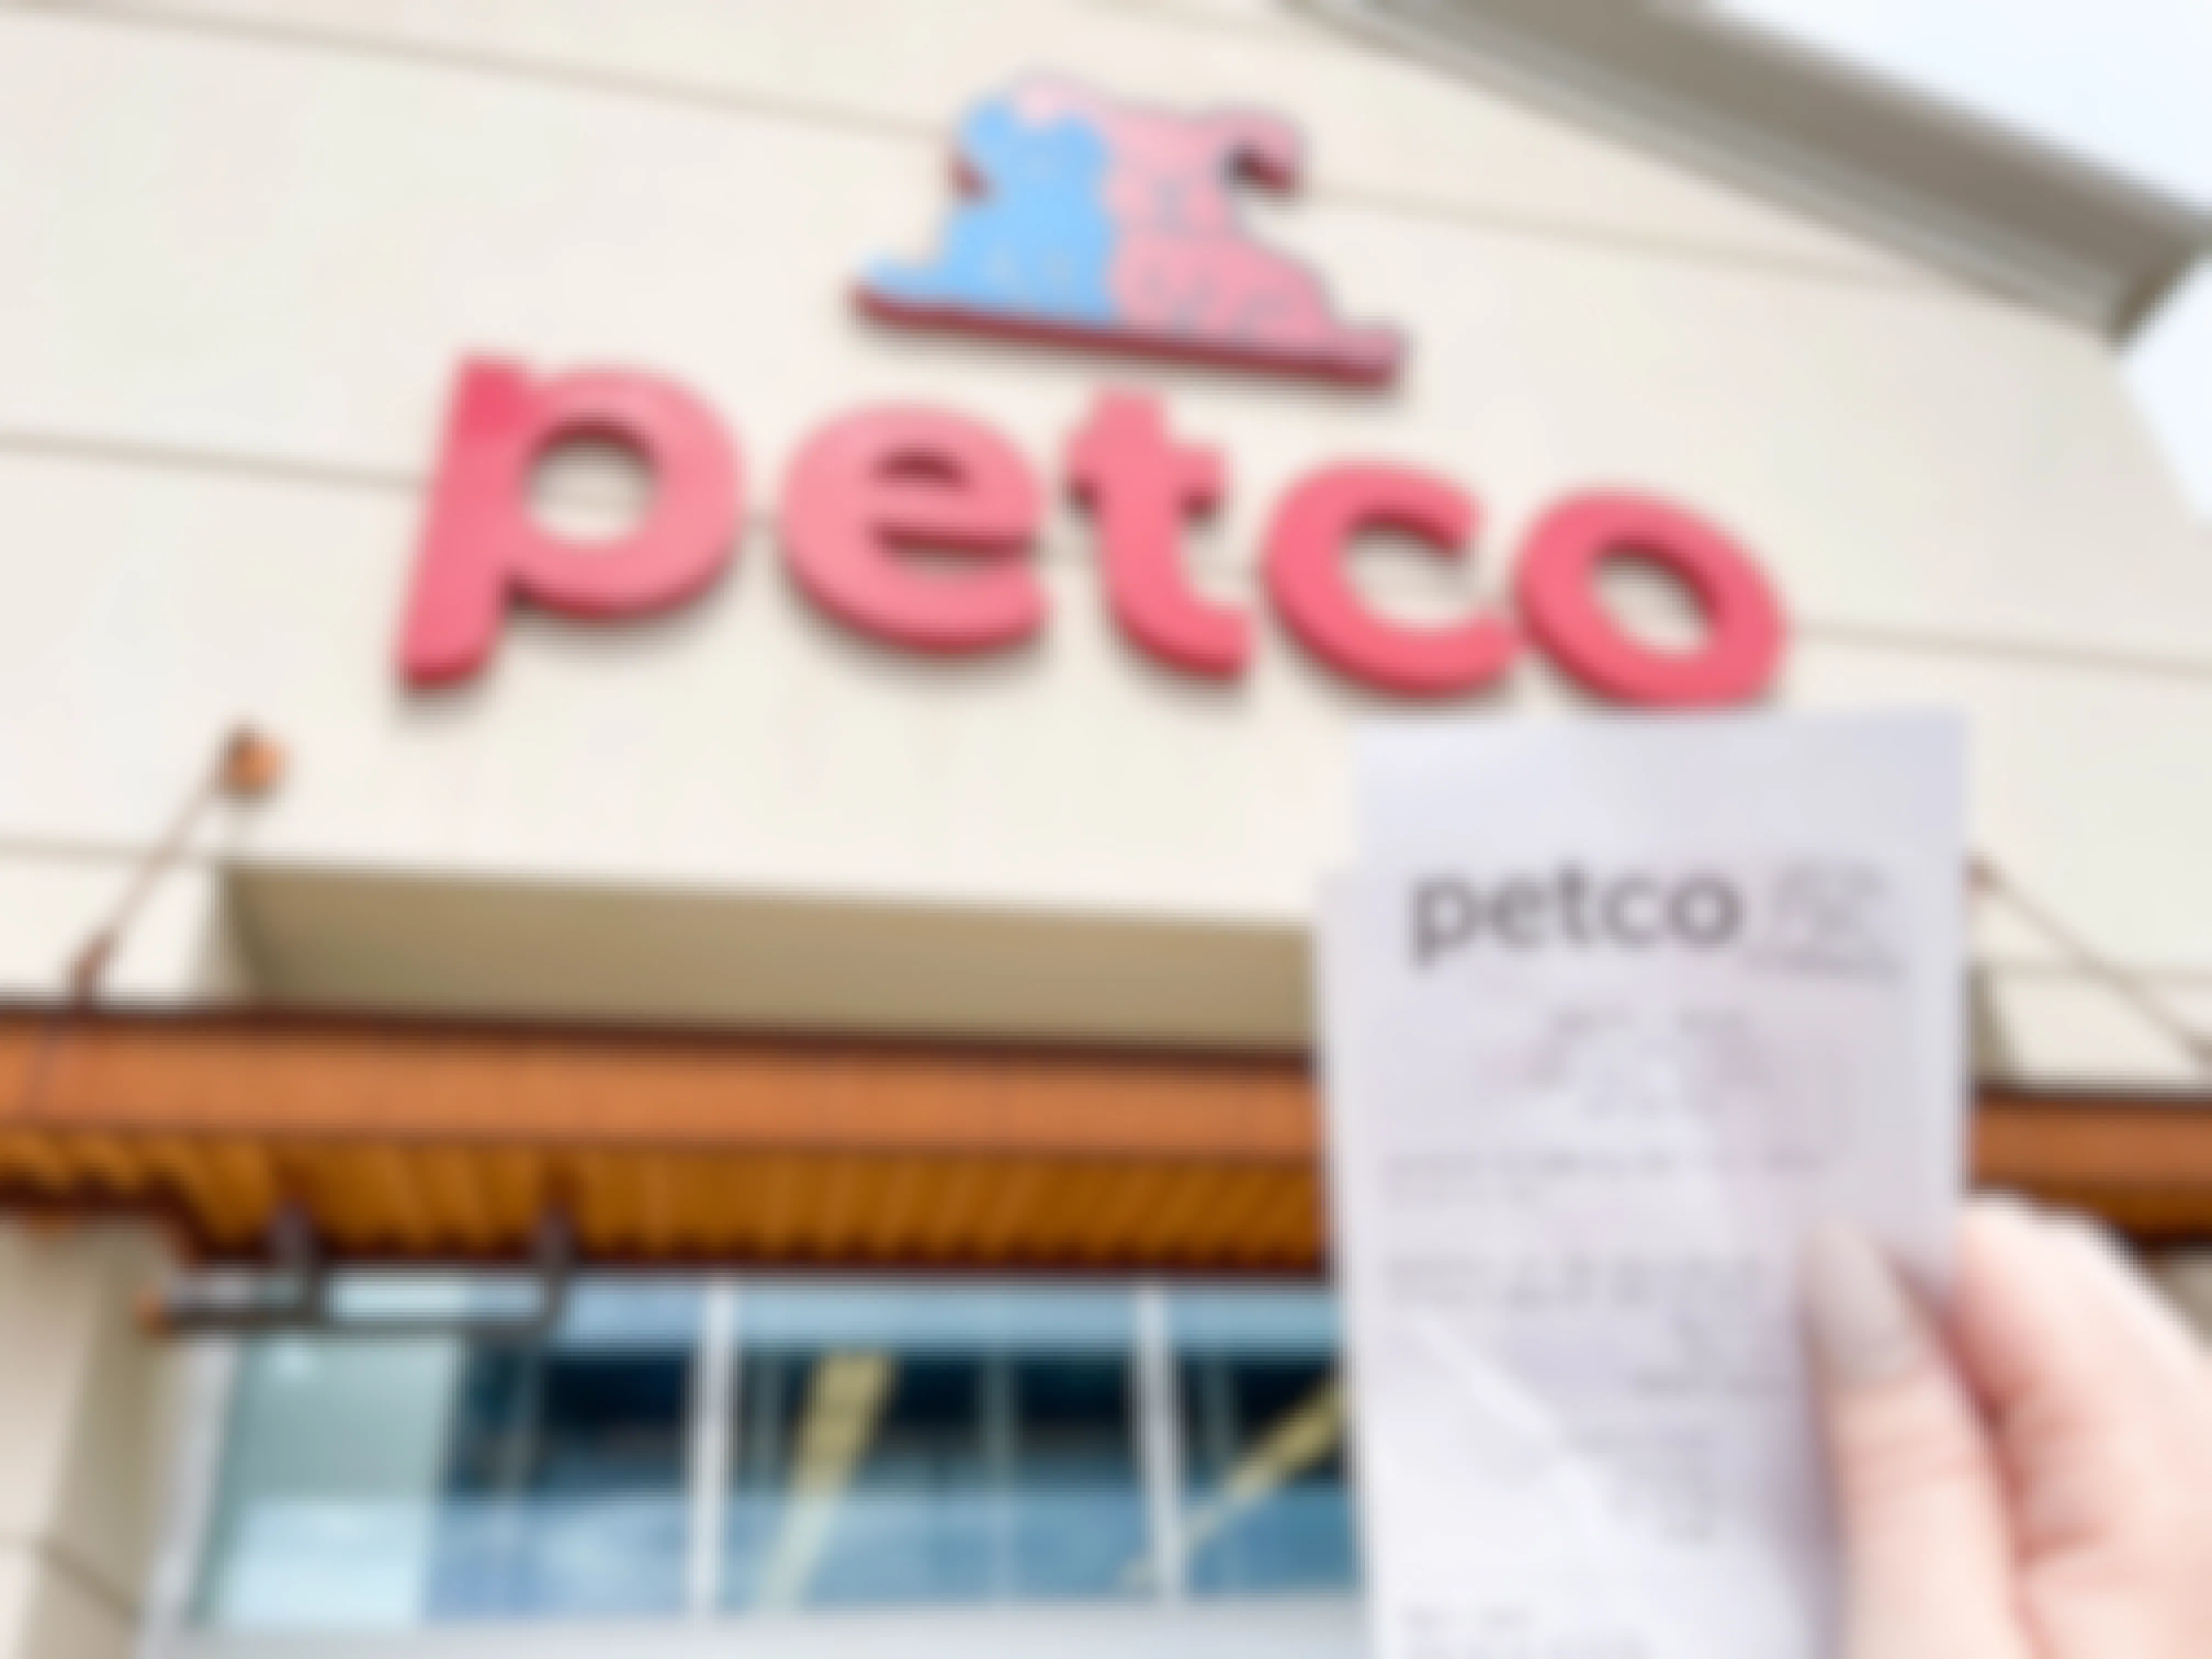 a person holding up at petco receipt outside of petco